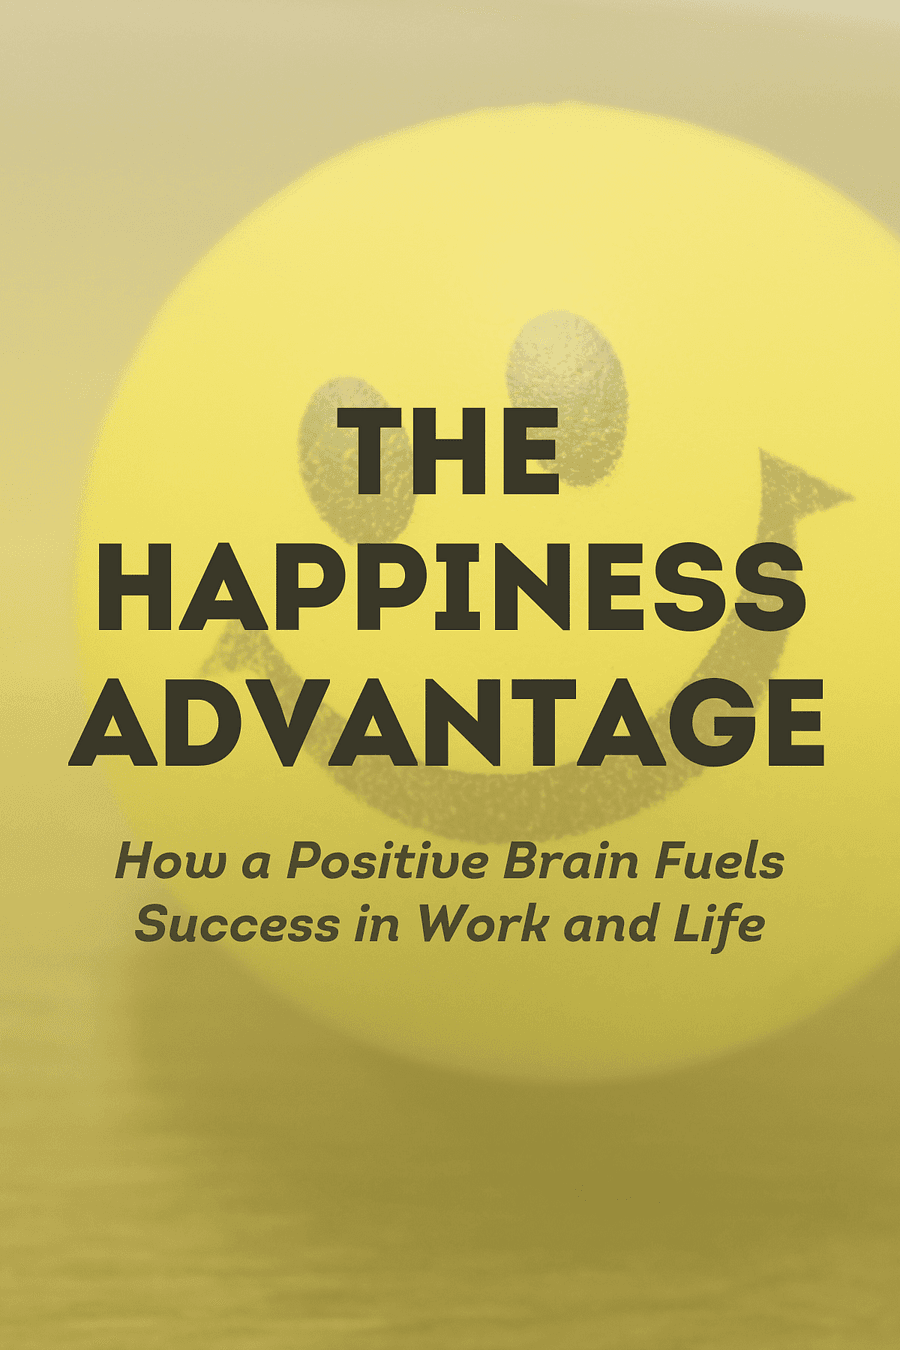 The Happiness Advantage by Shawn Achor - Book Summary